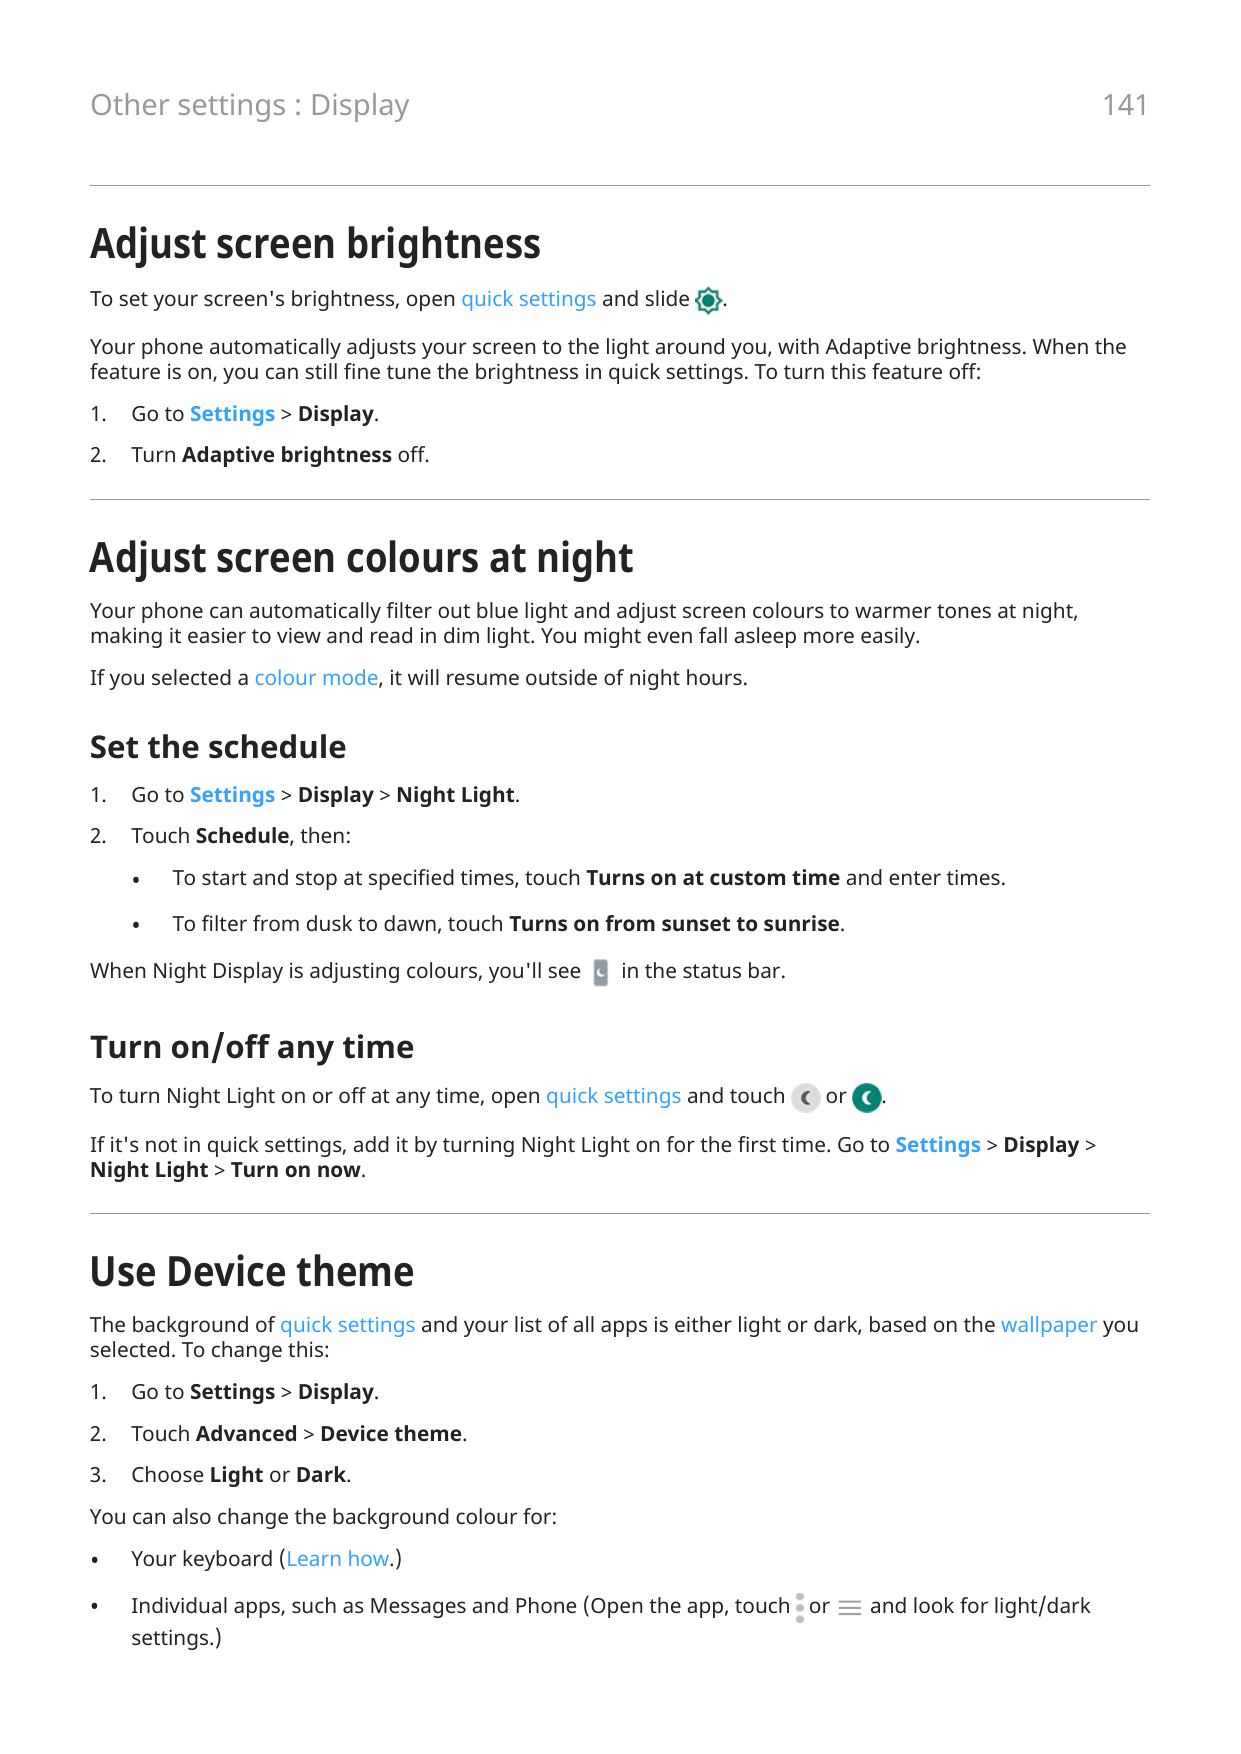 141Other settings : DisplayAdjust screen brightnessTo set your screen's brightness, open quick settings and slide.Your phone aut